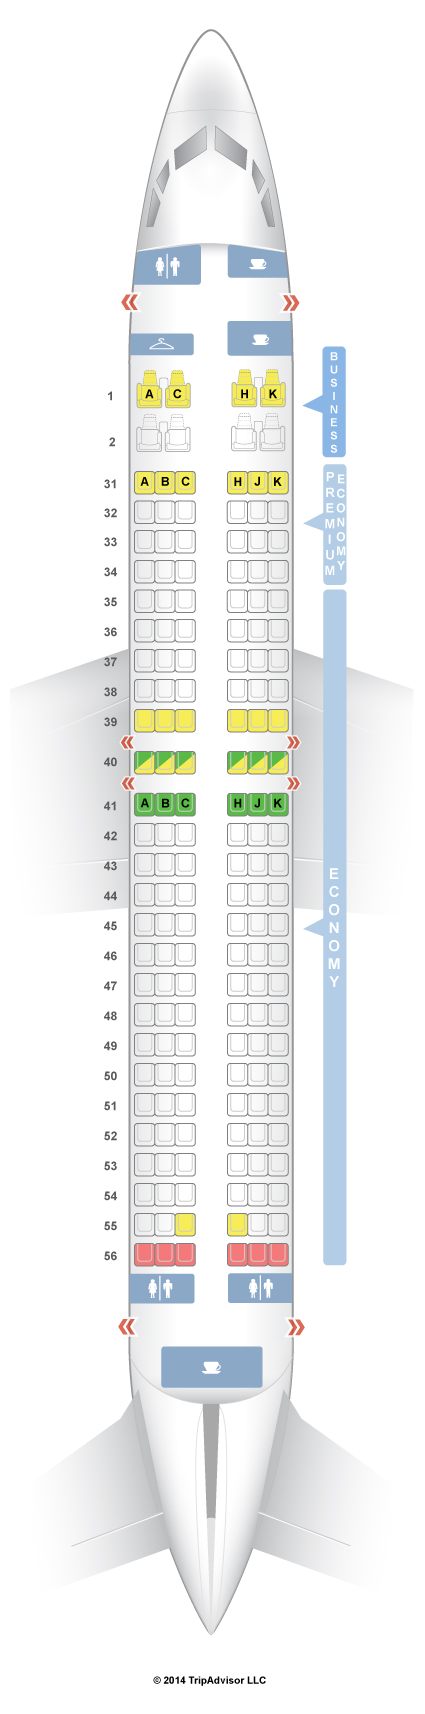 Boeing 737 800 Southwest Seating Chart